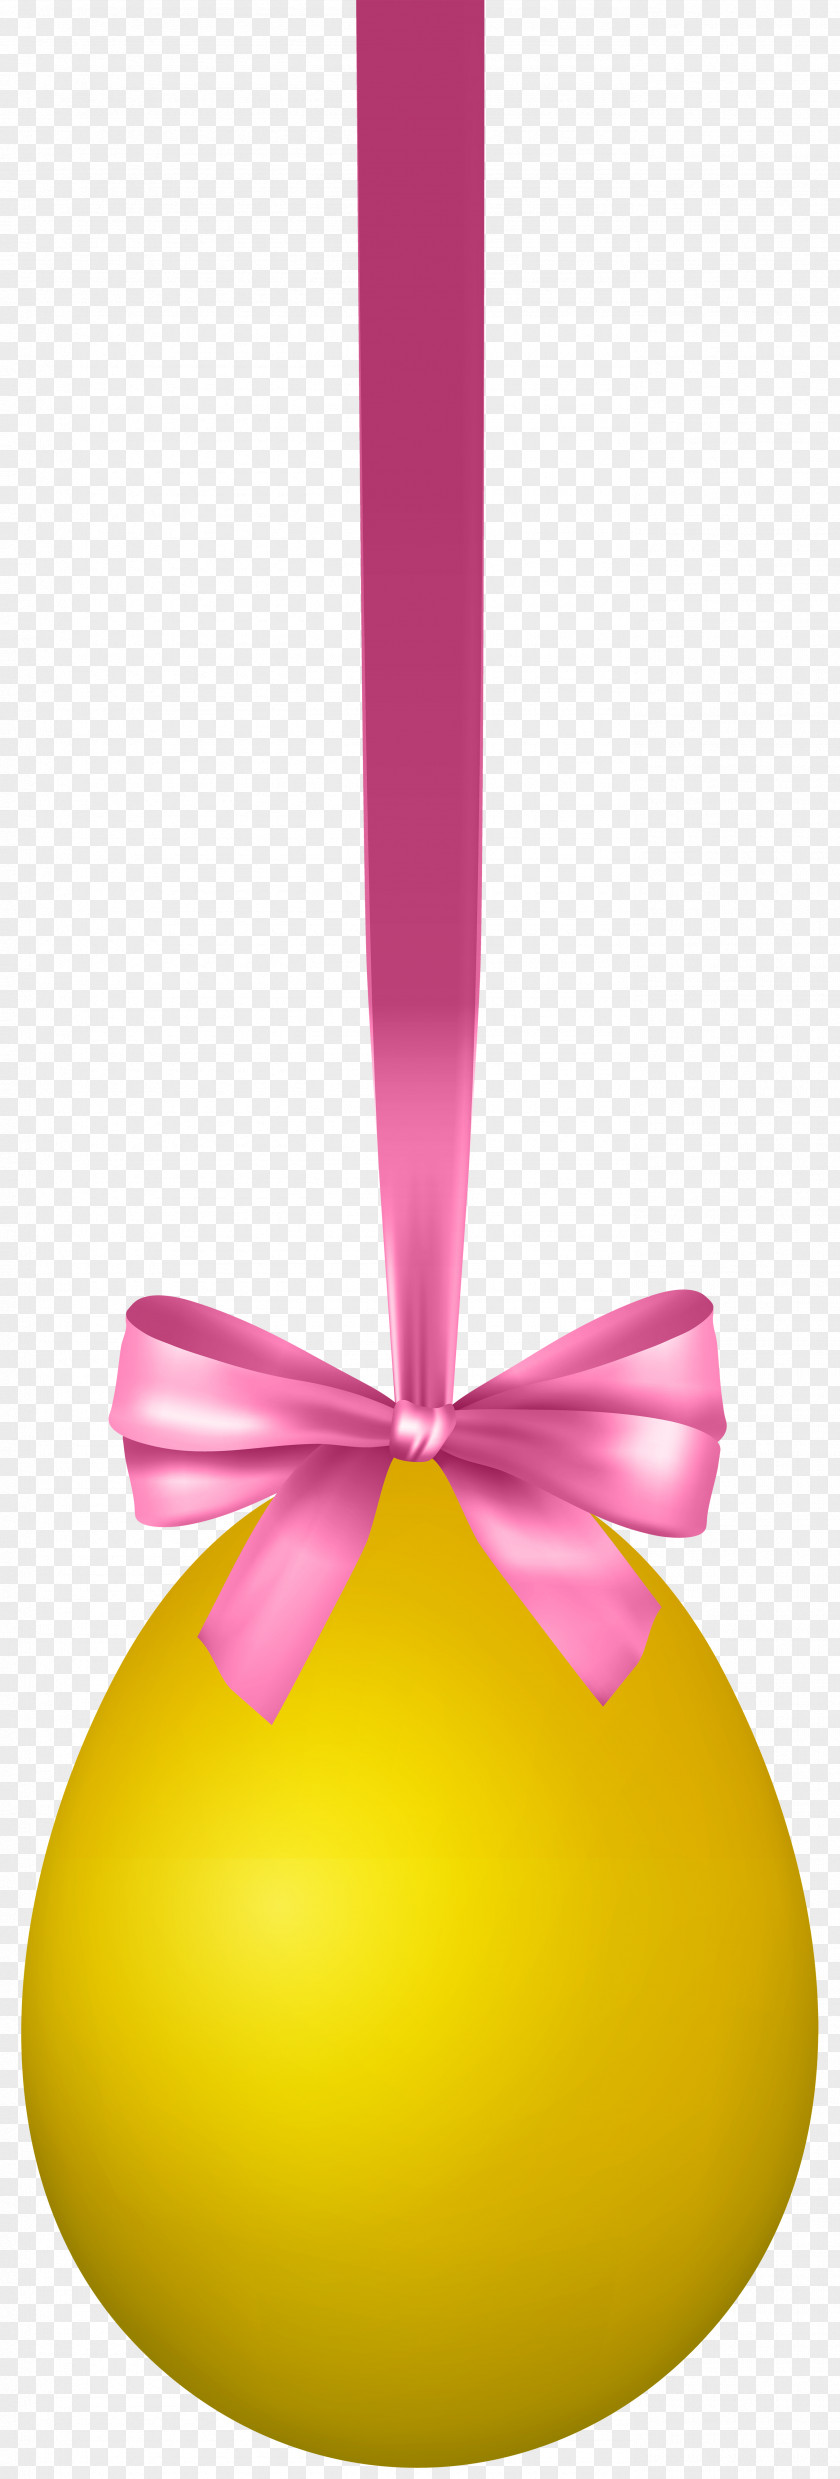 Yellow Hanging Easter Egg With Bow Transparent Clip Art Image Design PNG